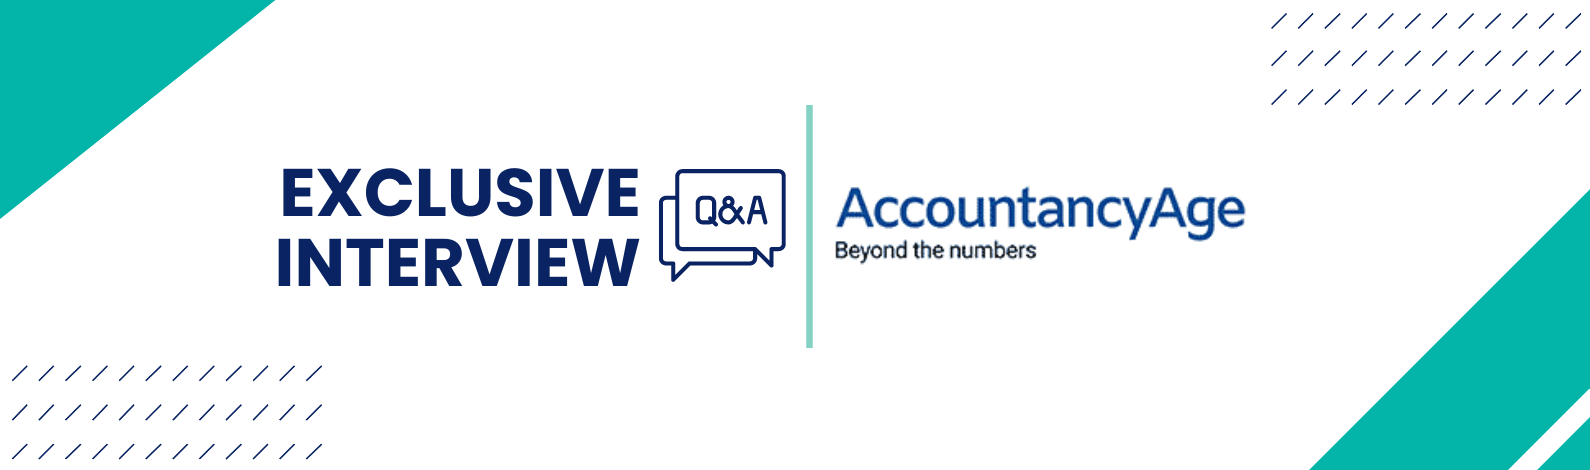 Accountancy Age exclusive interview